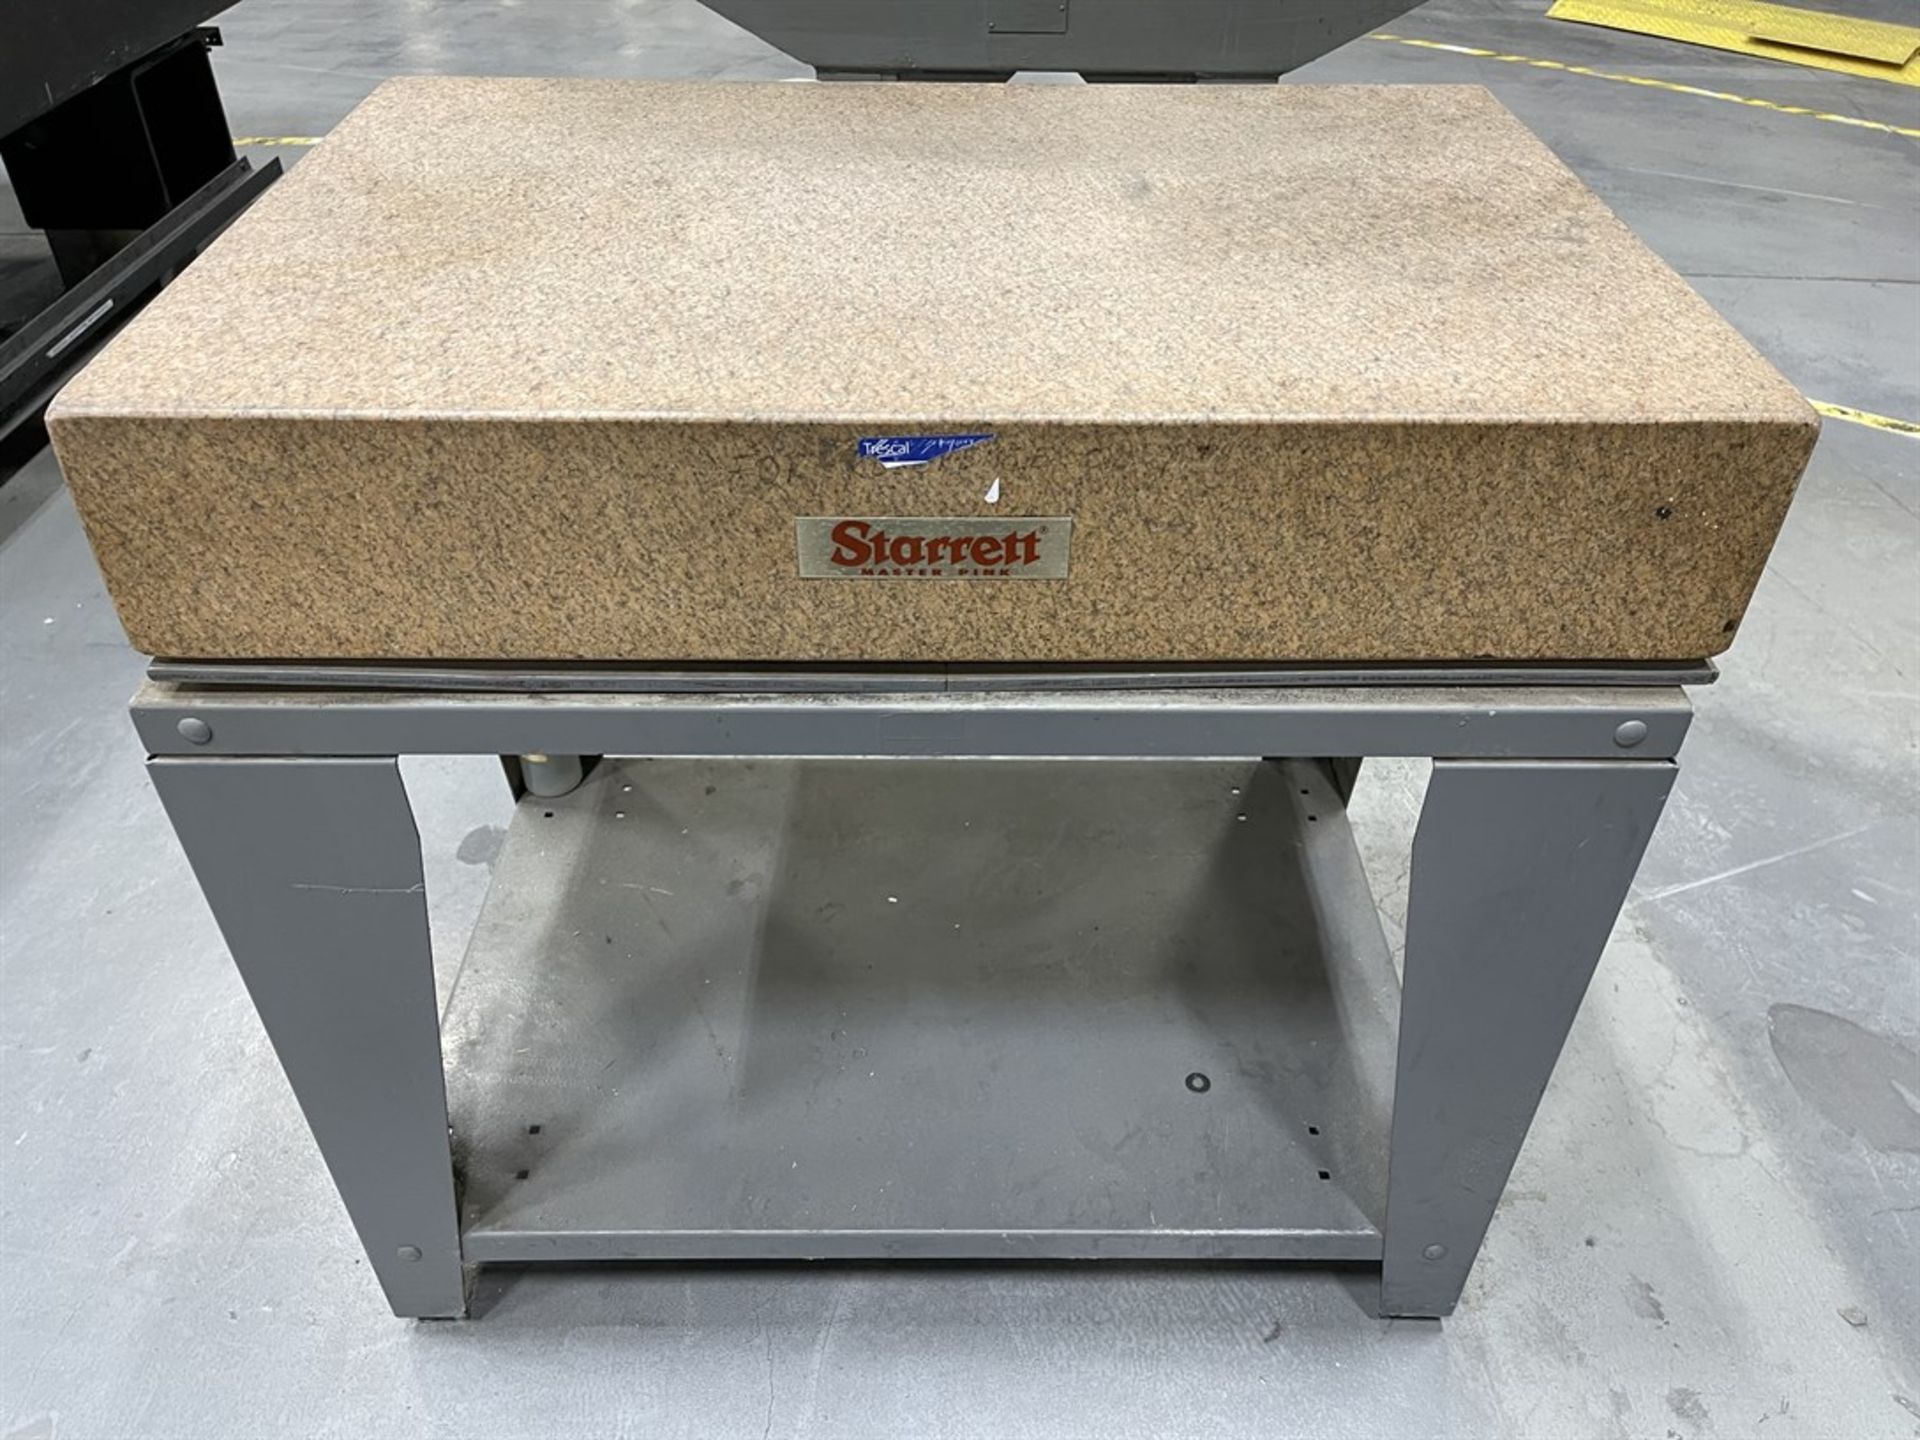 STARRETT Master Pink Granite Surface Plate on Steel Base, 24" x 36" x 6" Thick - Image 2 of 2